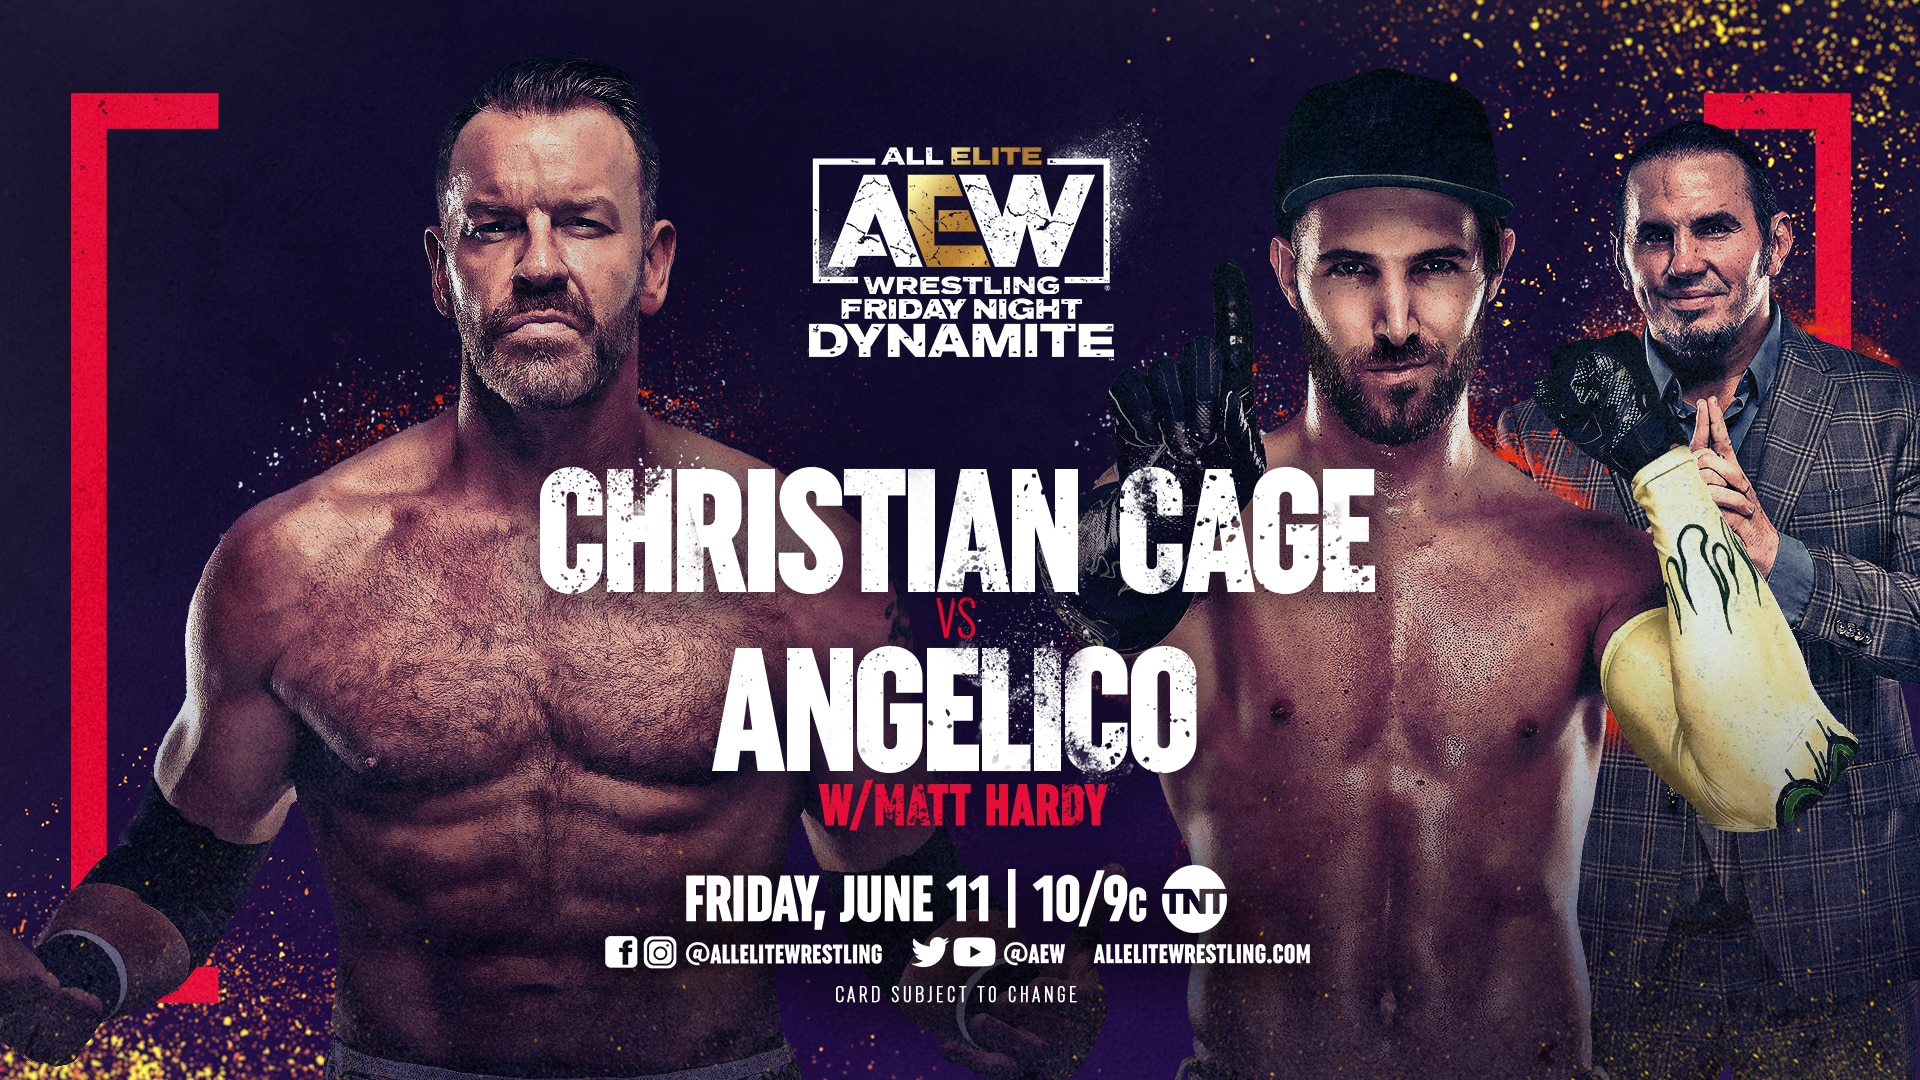 Christian Cage vs Angelico